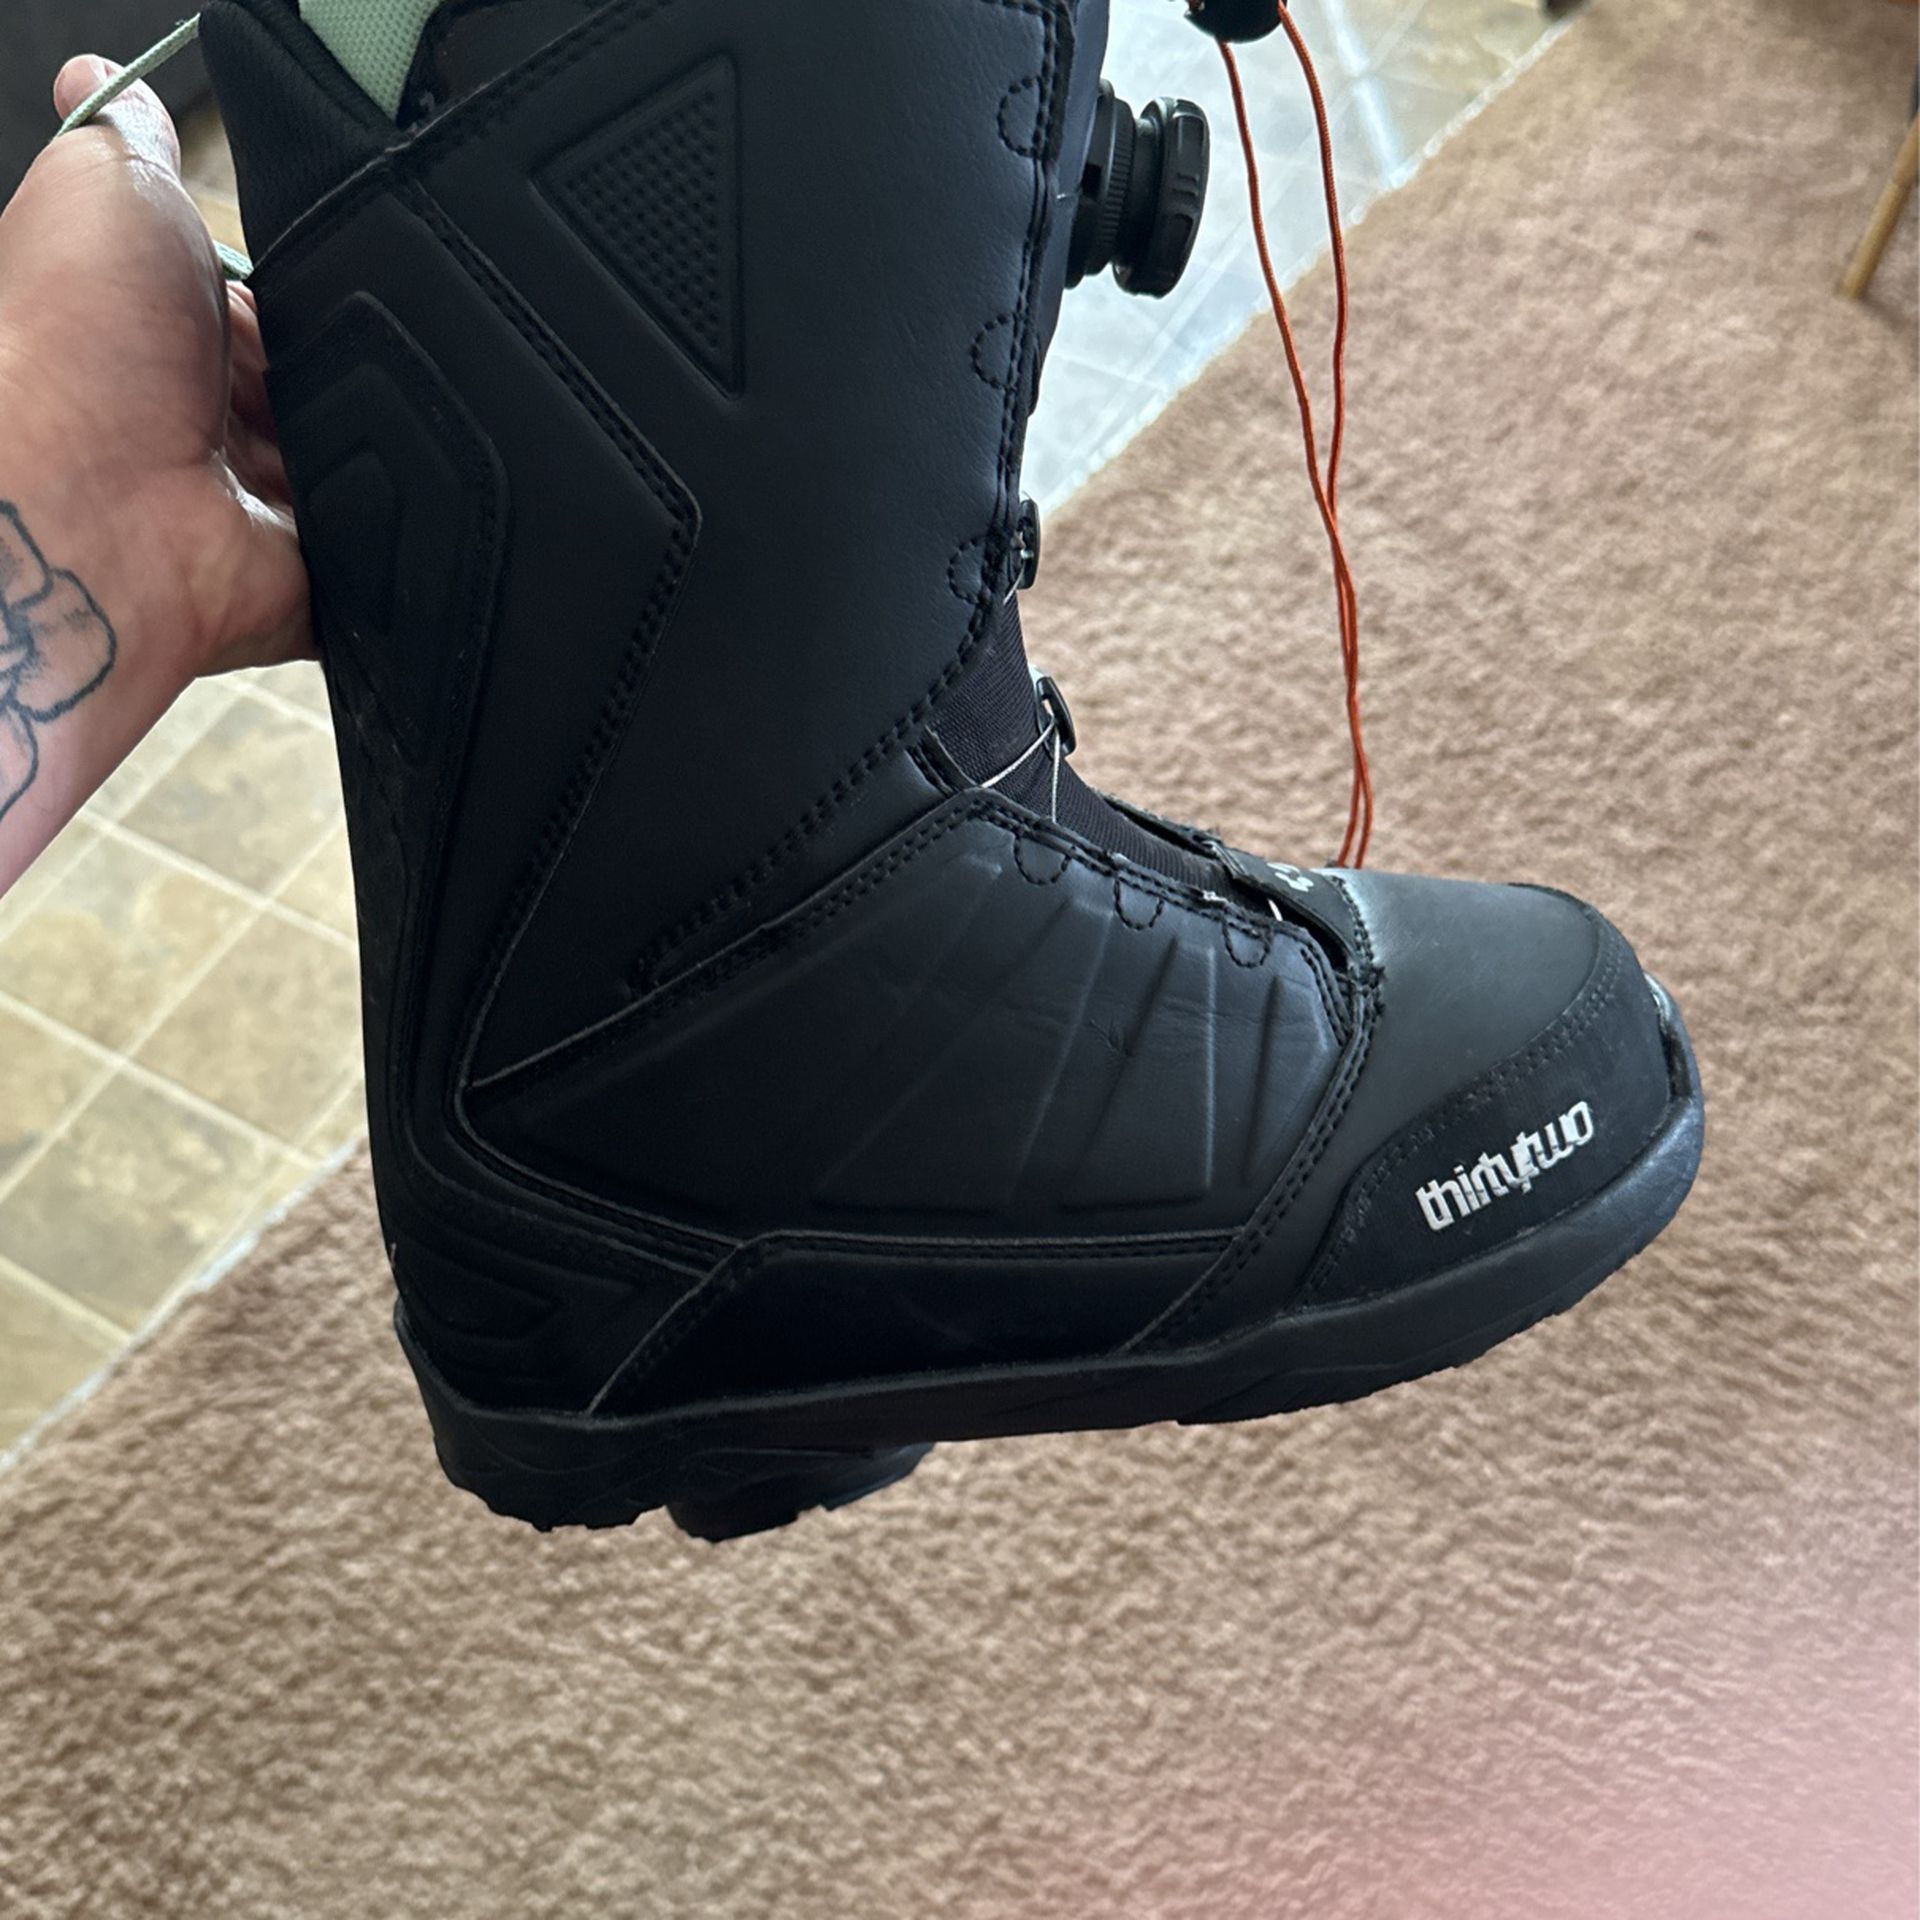 Woman’s Snow Boots